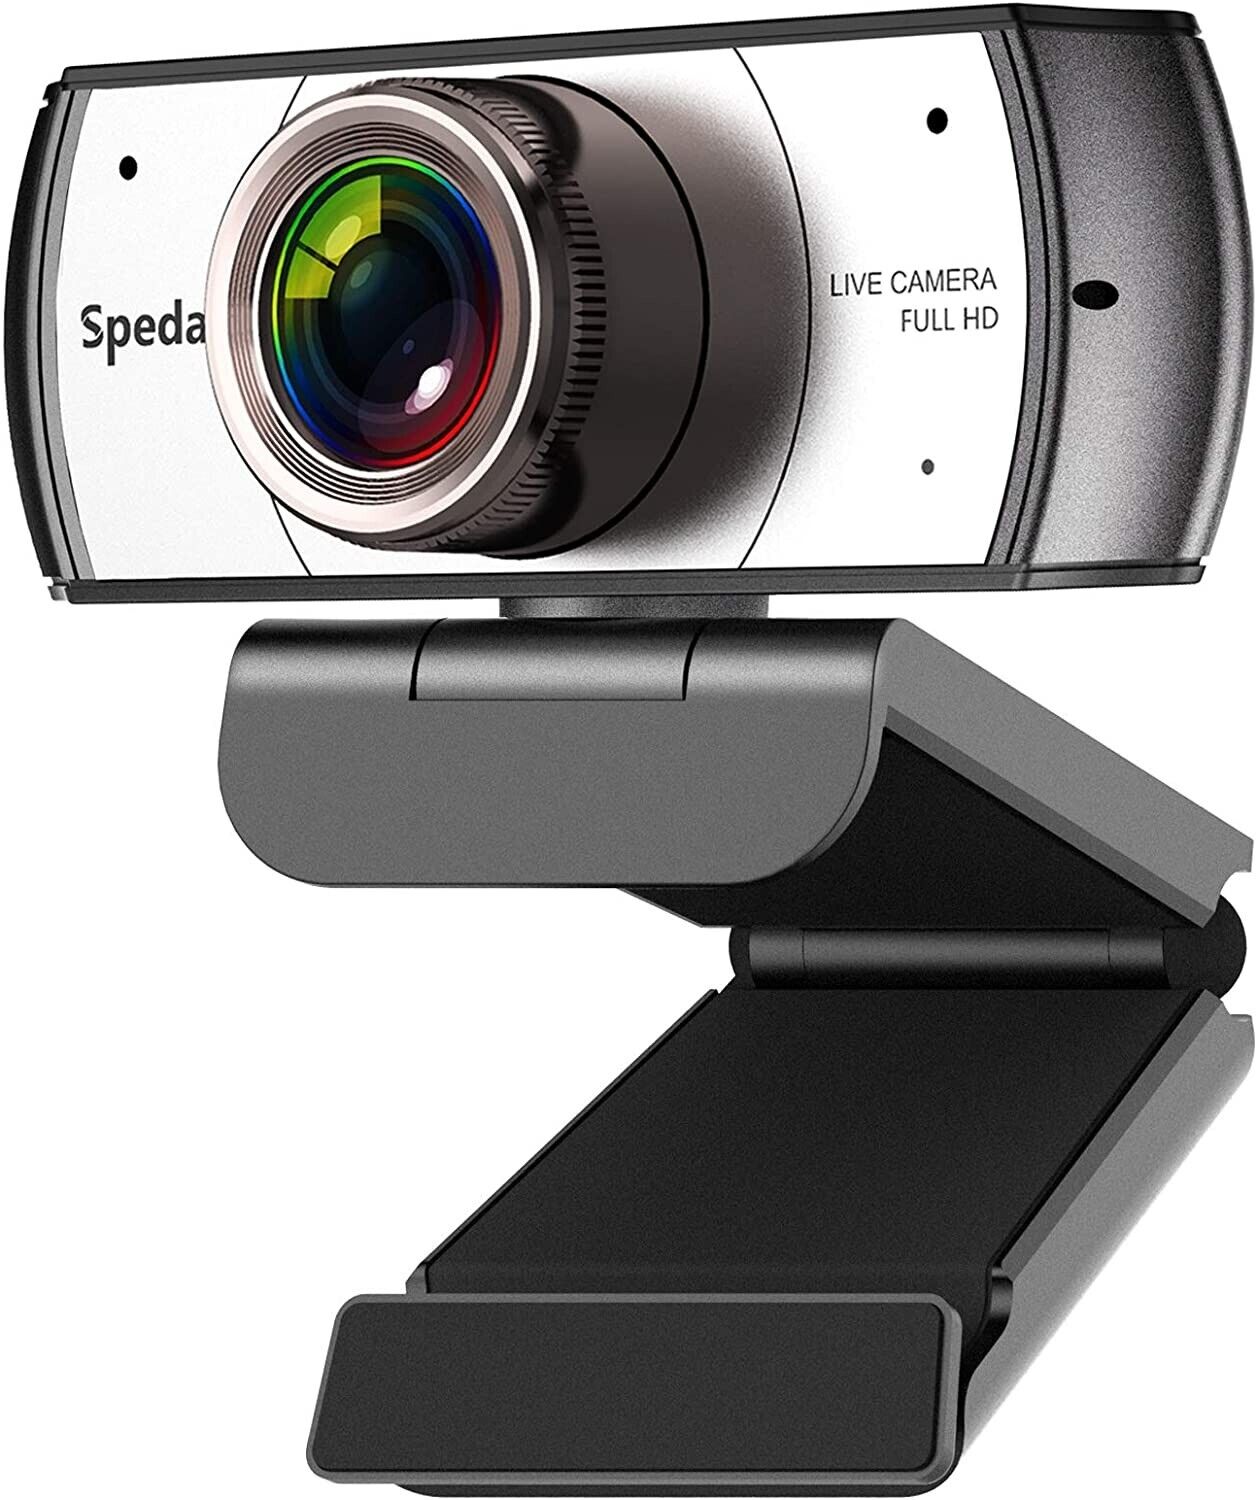 Spedal 120° Wide Angle Webcam Full HD 1080Pwith Microphone for Mac, PC, Laptop